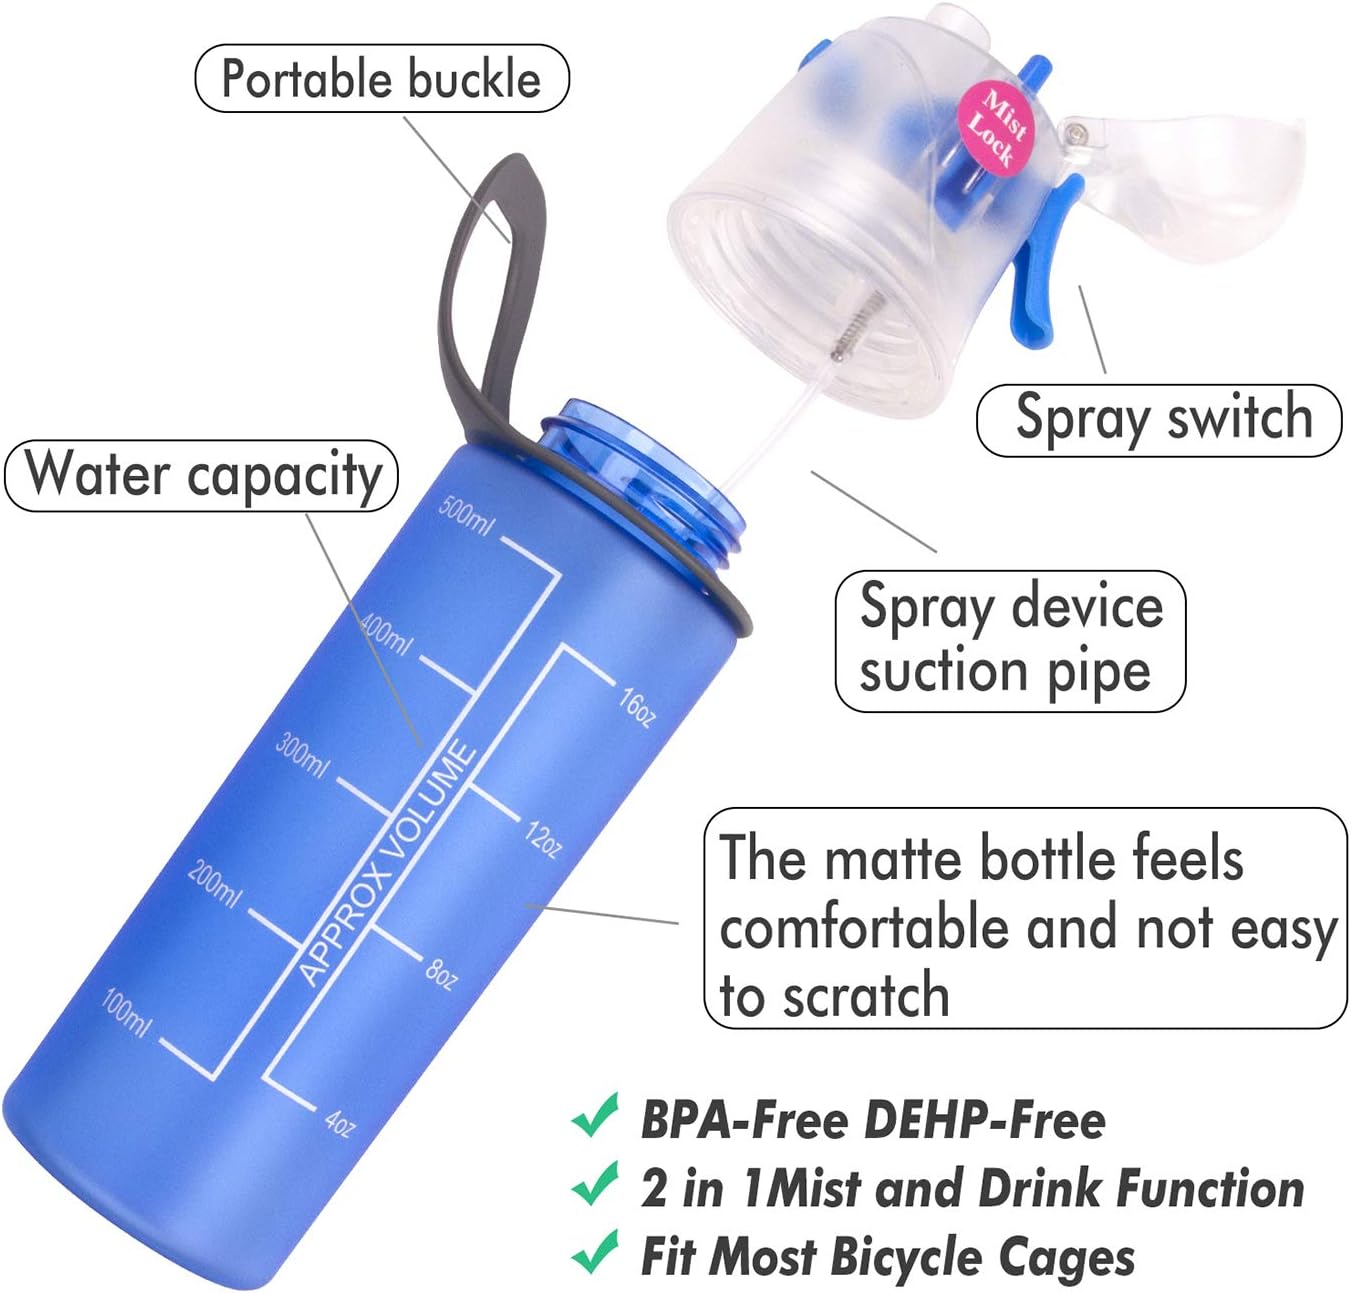 Drinking Misting Sports Water Bottle, Non-Toxic BPA Free & Eco-Friendly Tritan Copolyester, Fast Water Flow Opens with 1-Click, Portable Leak-Proof Spray Bottle for Cycling Fitness Camping Hiking-001P